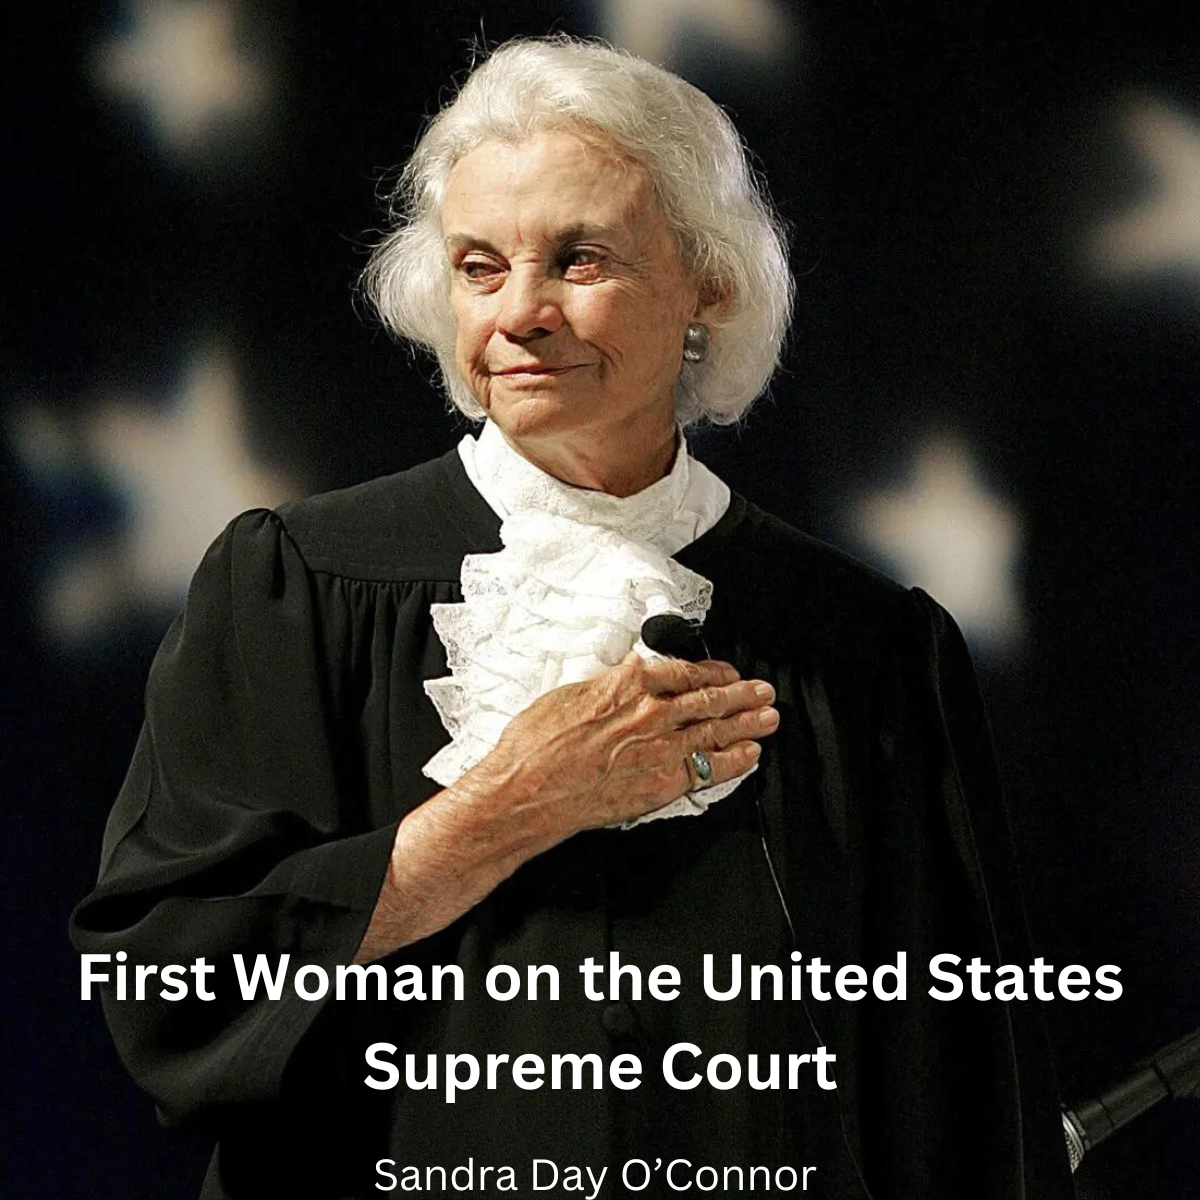 Sandra Day O'Connor, the First Woman Justice on the Supreme Court